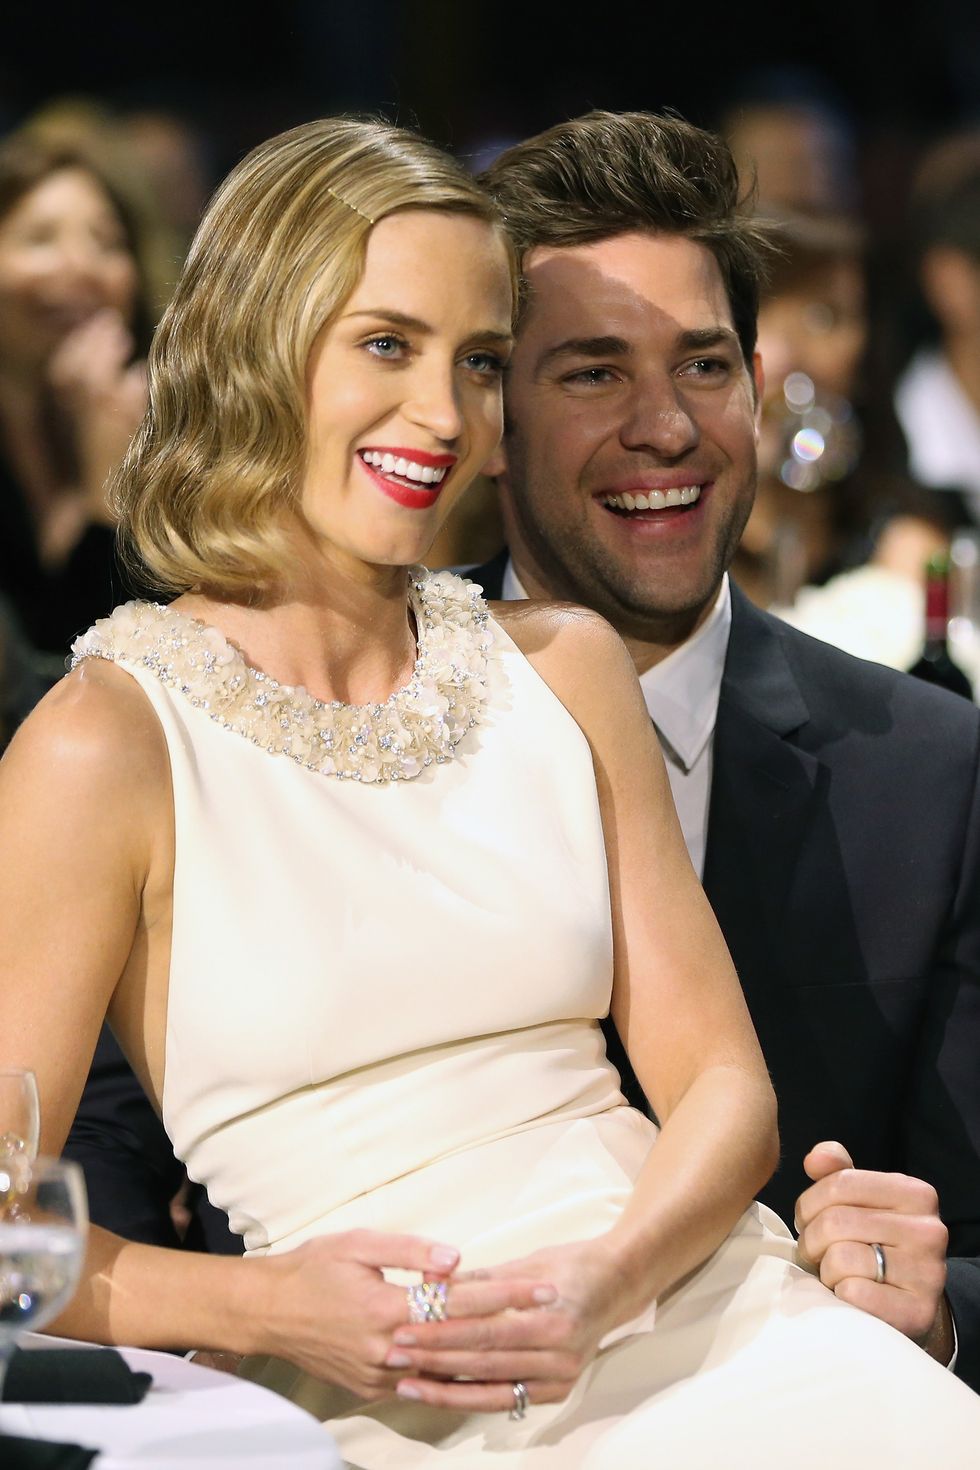 Emily Blunt is pregnant - expecting second child with John Krasinski